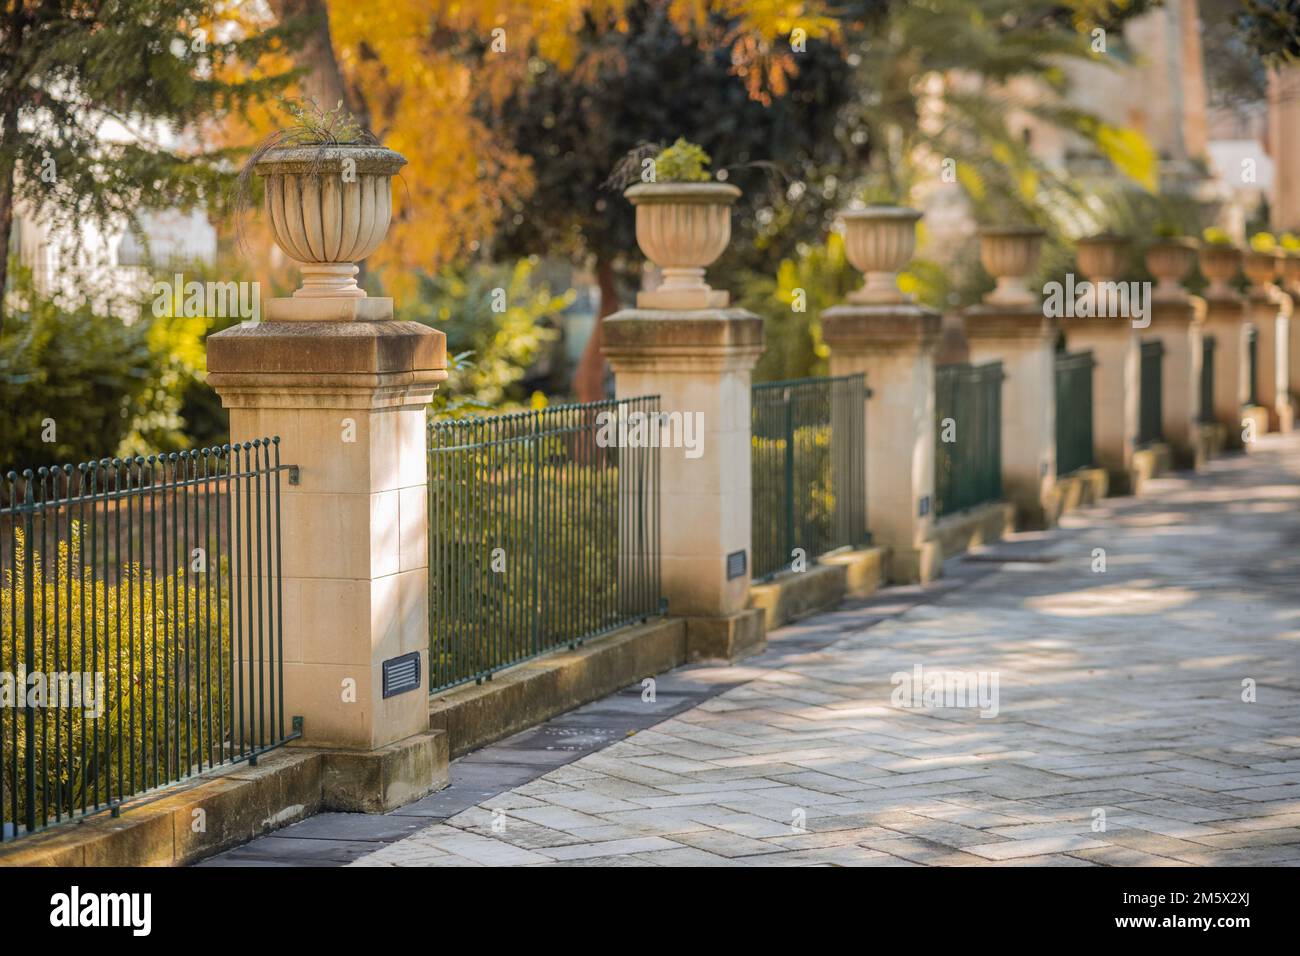 Argotti university gardens in Valletta, Malta on a sunny day. View of a row of pillars with fence. Stock Photo